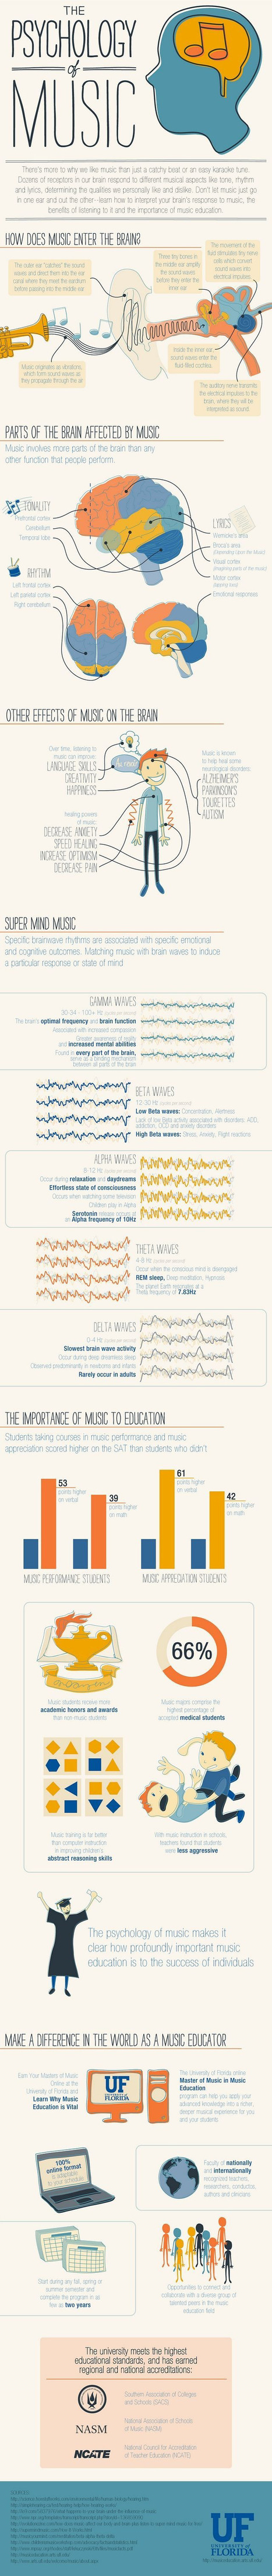 A Wonderful Graphic Featuring The Importance of Music in Education [Infographic] | Professional Learning for Busy Educators | Scoop.it